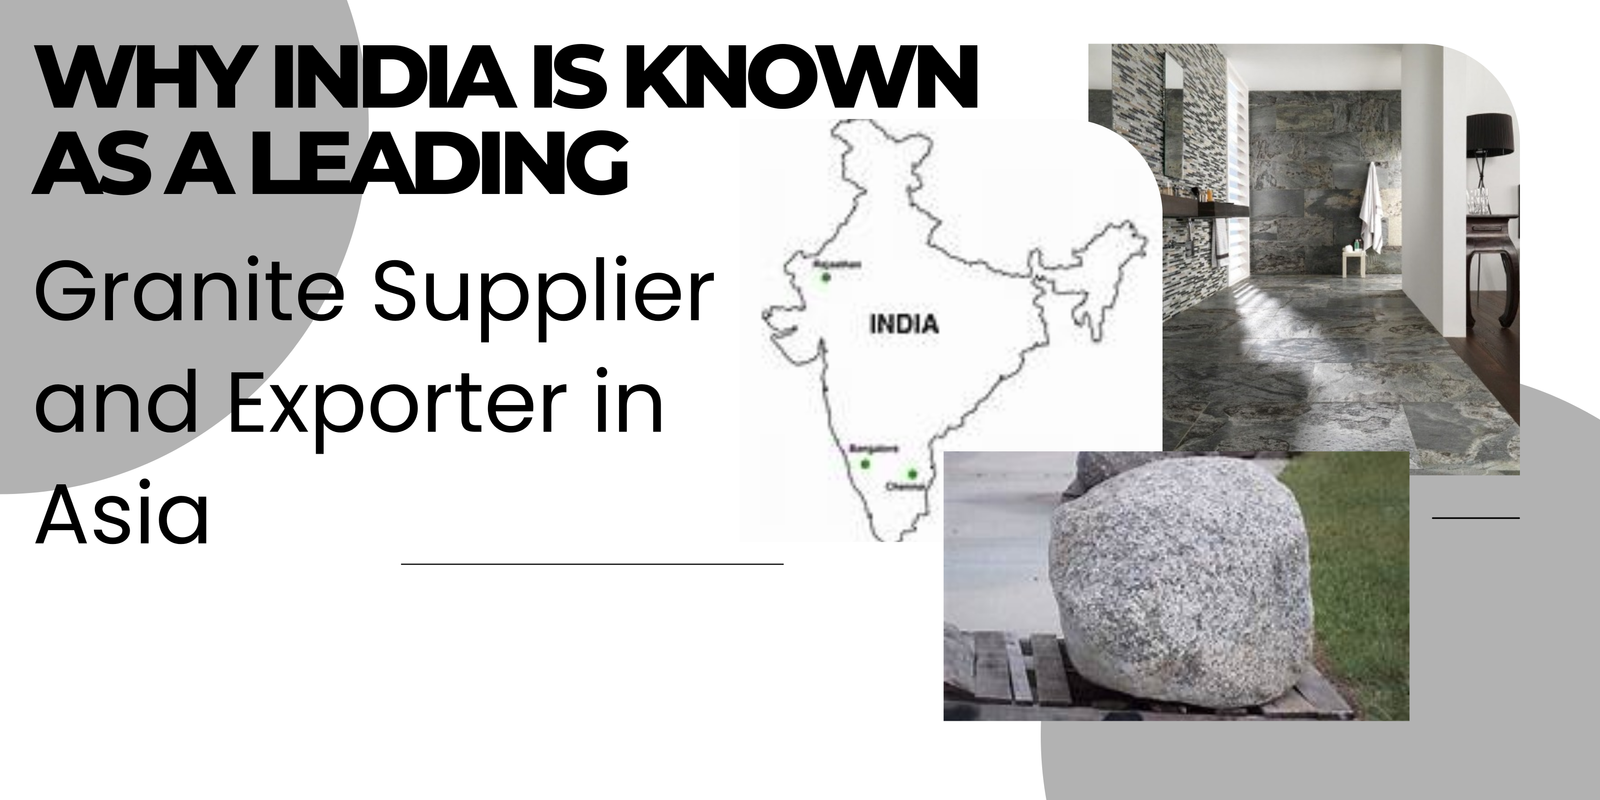 Why India Is Known as a Leading Granite Supplier and Exporter in Asia